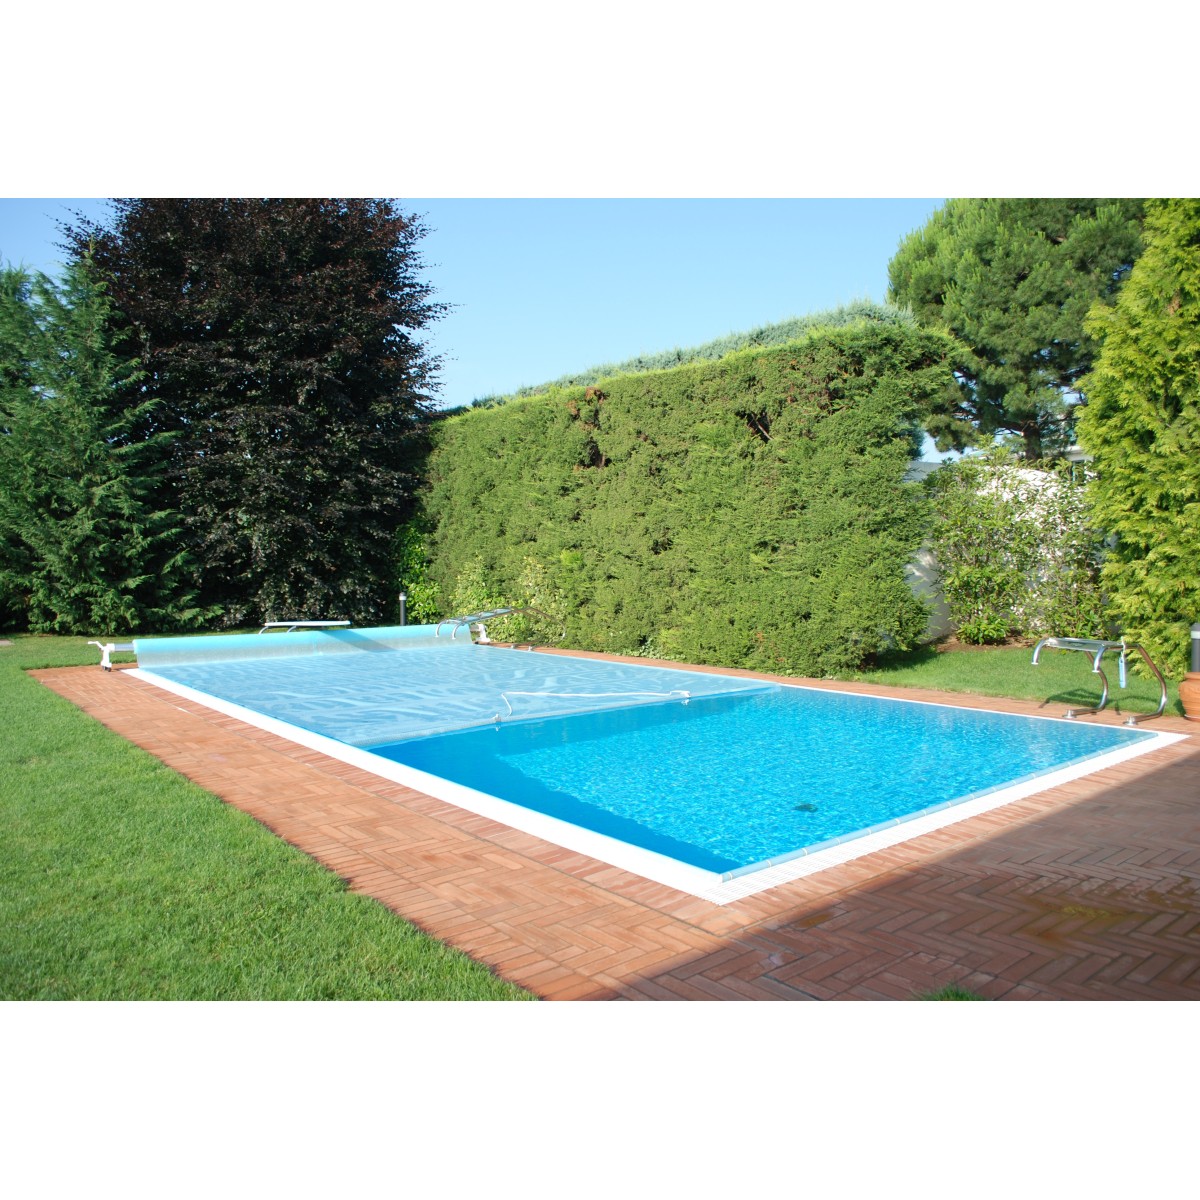 Isothermal cover Sunguard De Lux - size 5x11